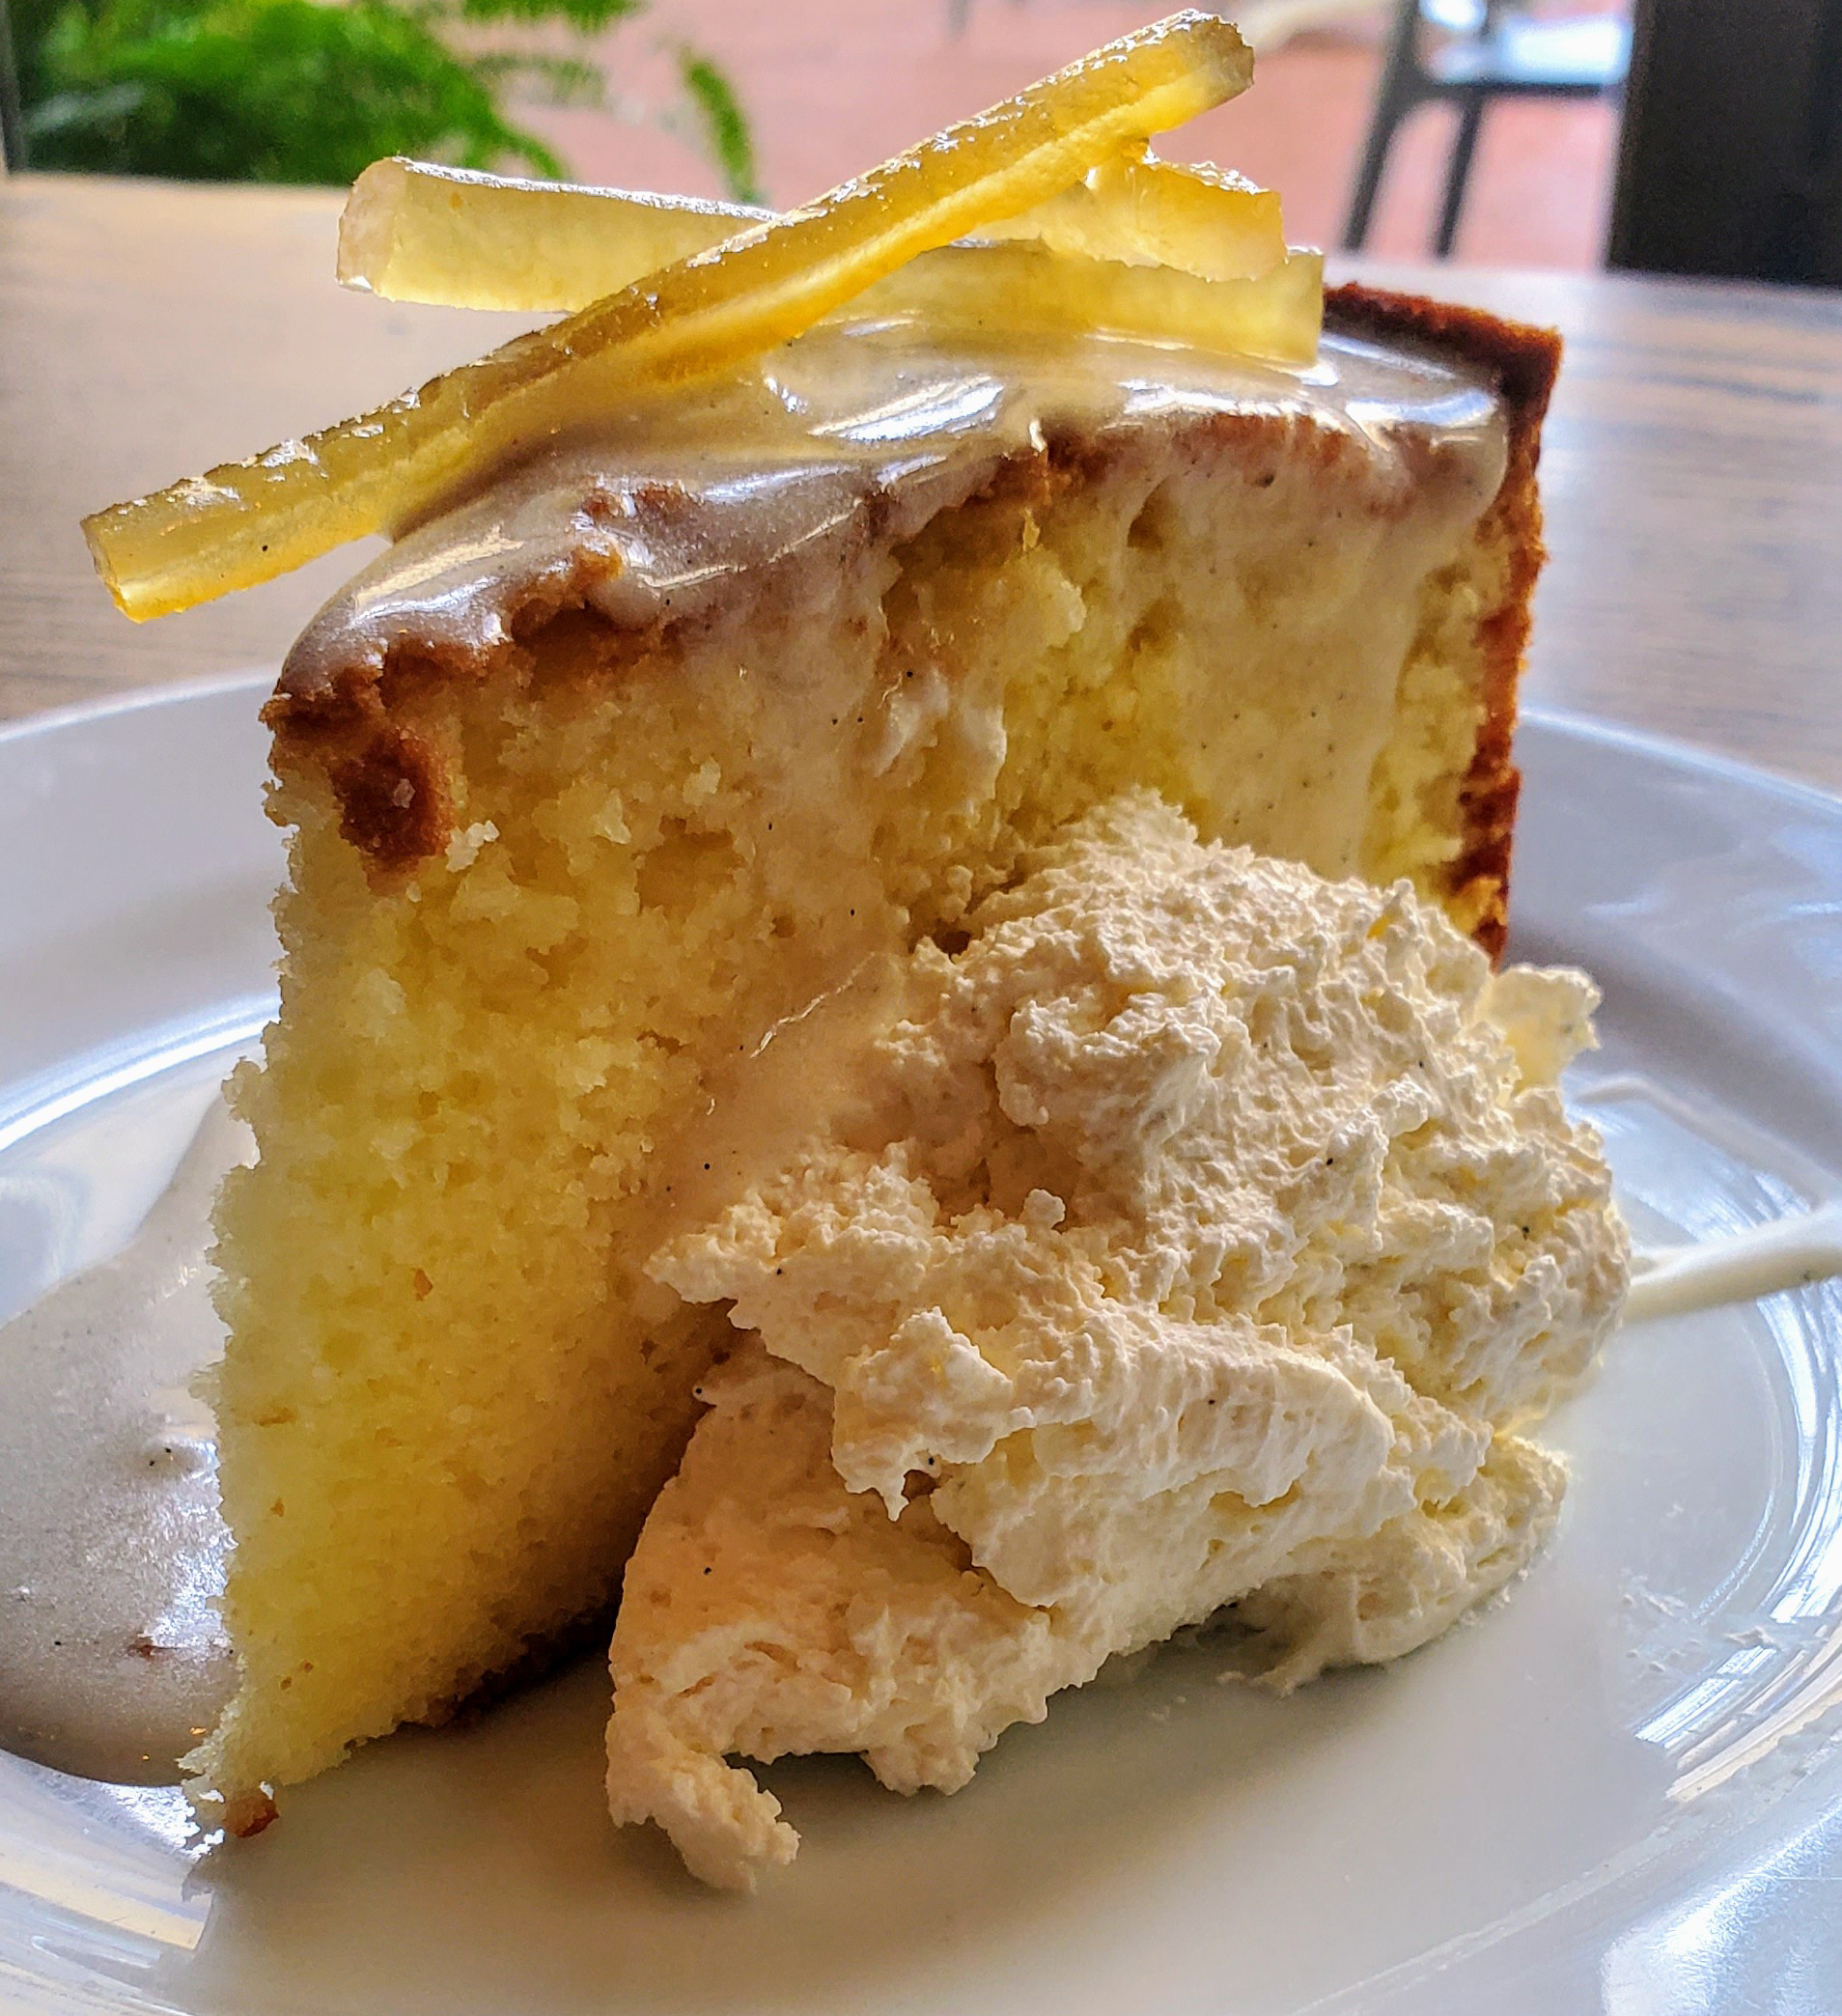 German butter pound cake at Rowdy Hall